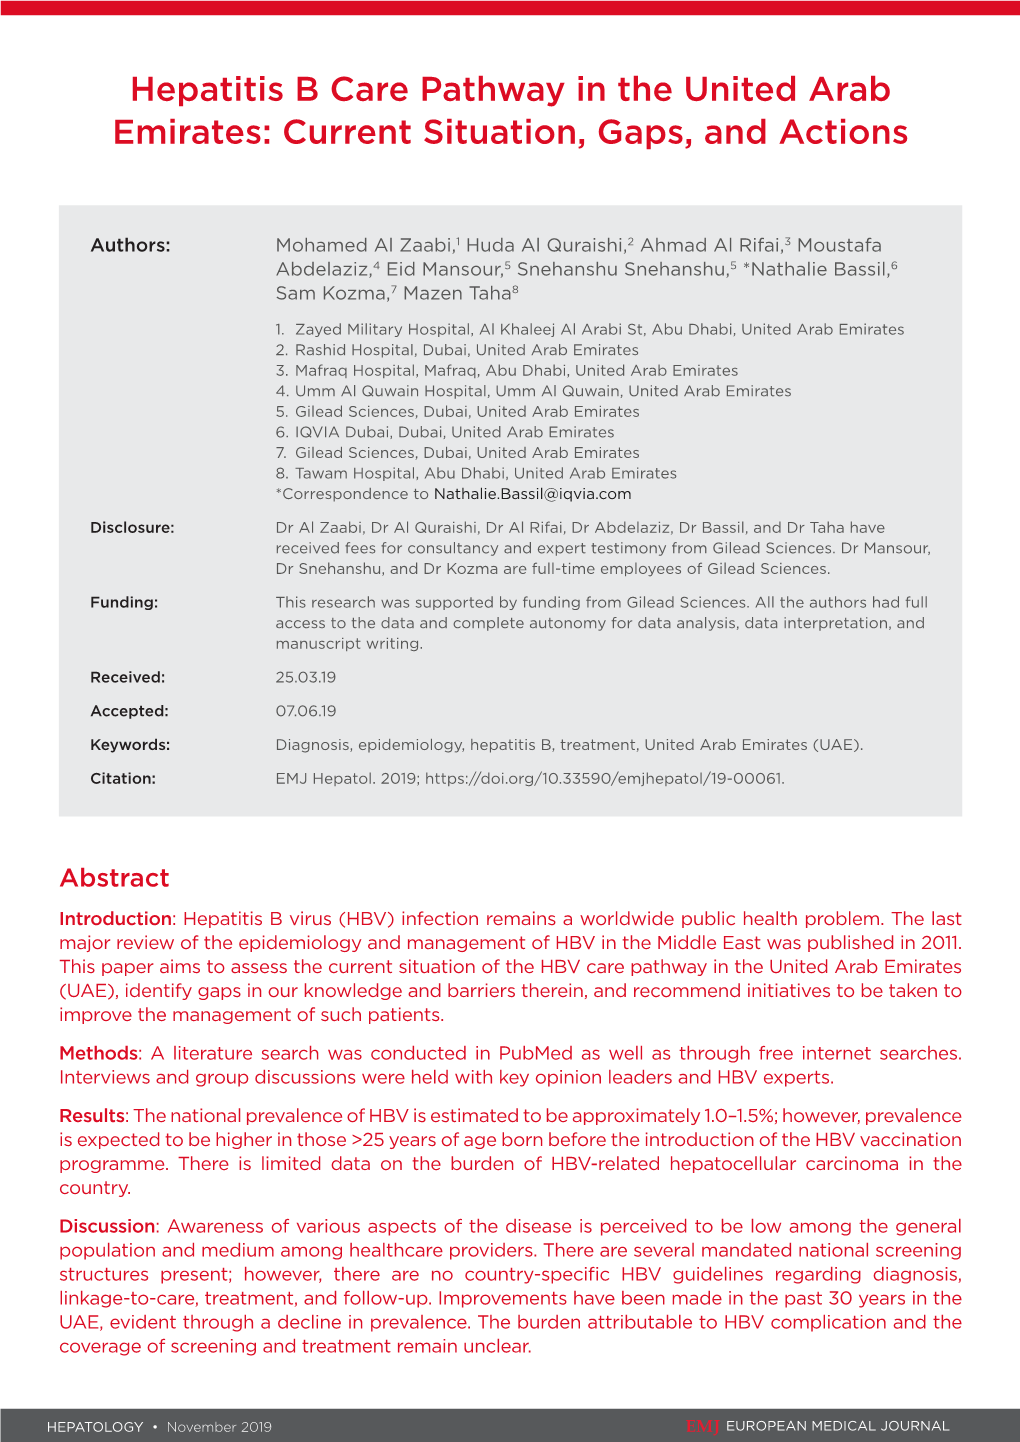 Hepatitis B Care Pathway in the United Arab Emirates: Current Situation, Gaps, and Actions